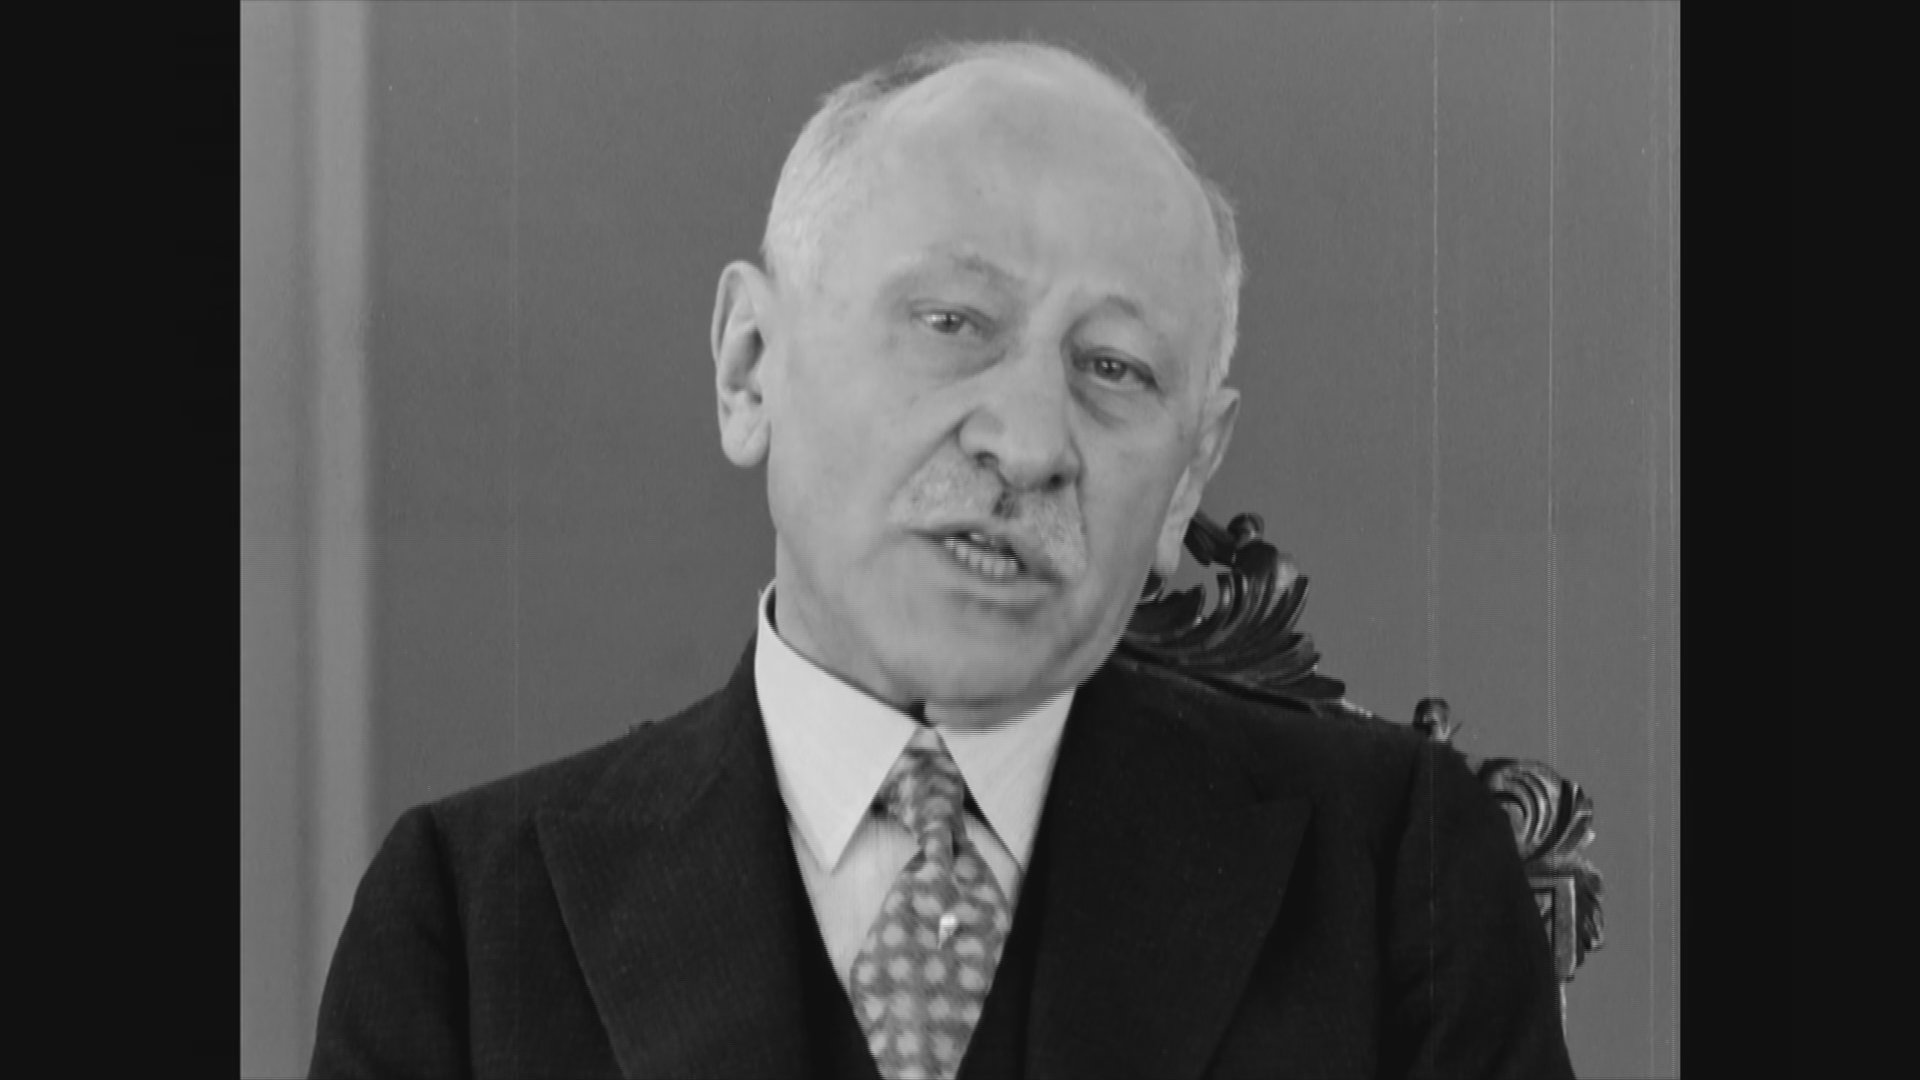 Julius Rosenwald: "Don't be fooled by believing that because a man is rich, that he is necessarily smart. There is ample proof to the contrary."